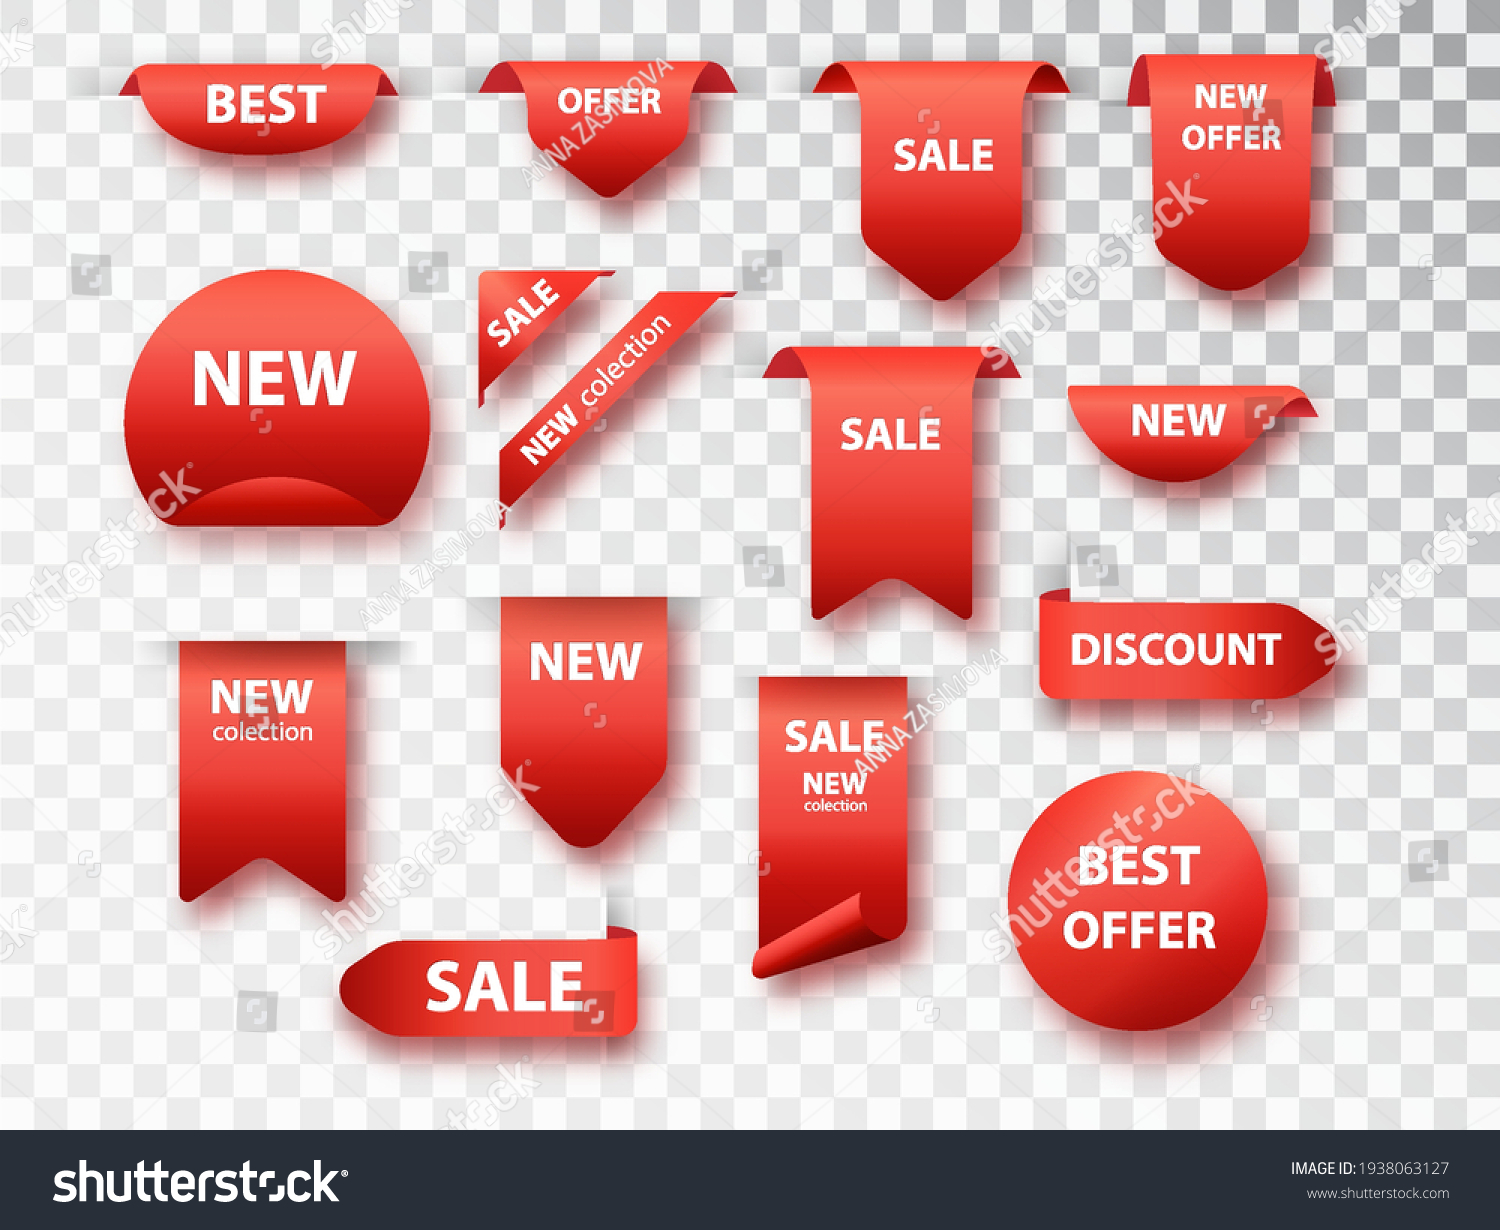 Product ribbon Images, Stock Photos & Vectors | Shutterstock